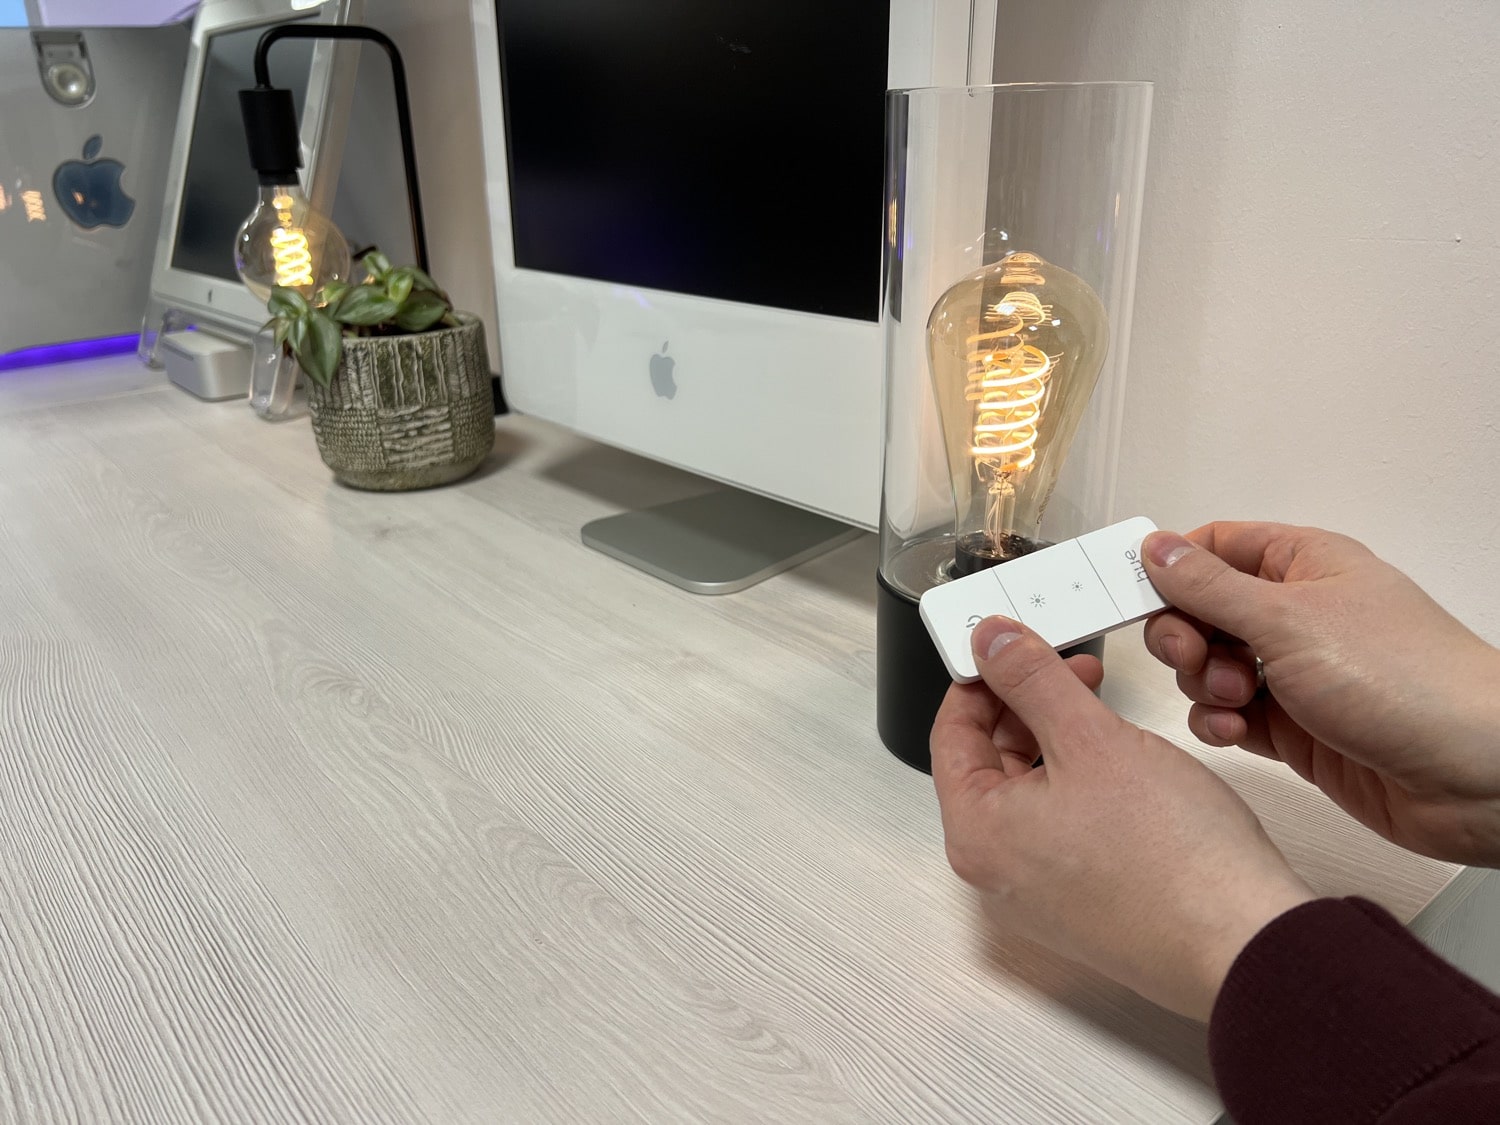 Hueblog: Resetting Philips Hue lamps with the new dimmer switch